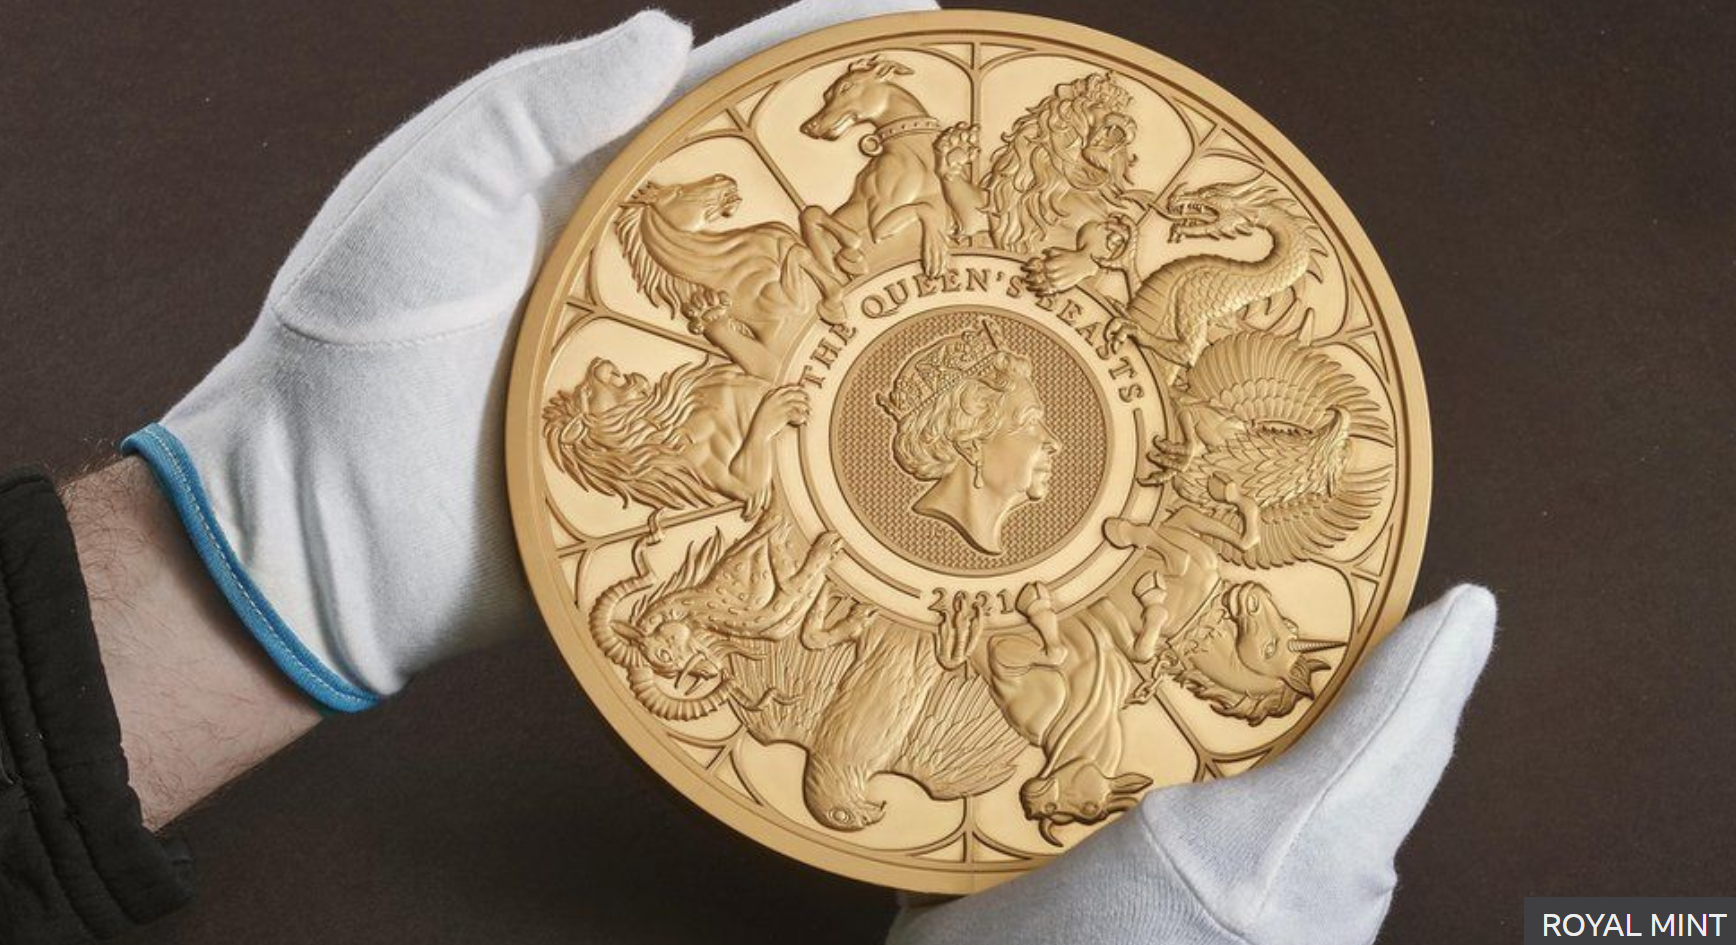 The gold coin featuring 10 creatures which appeared in stone statues on the Queen’s route to her coronation